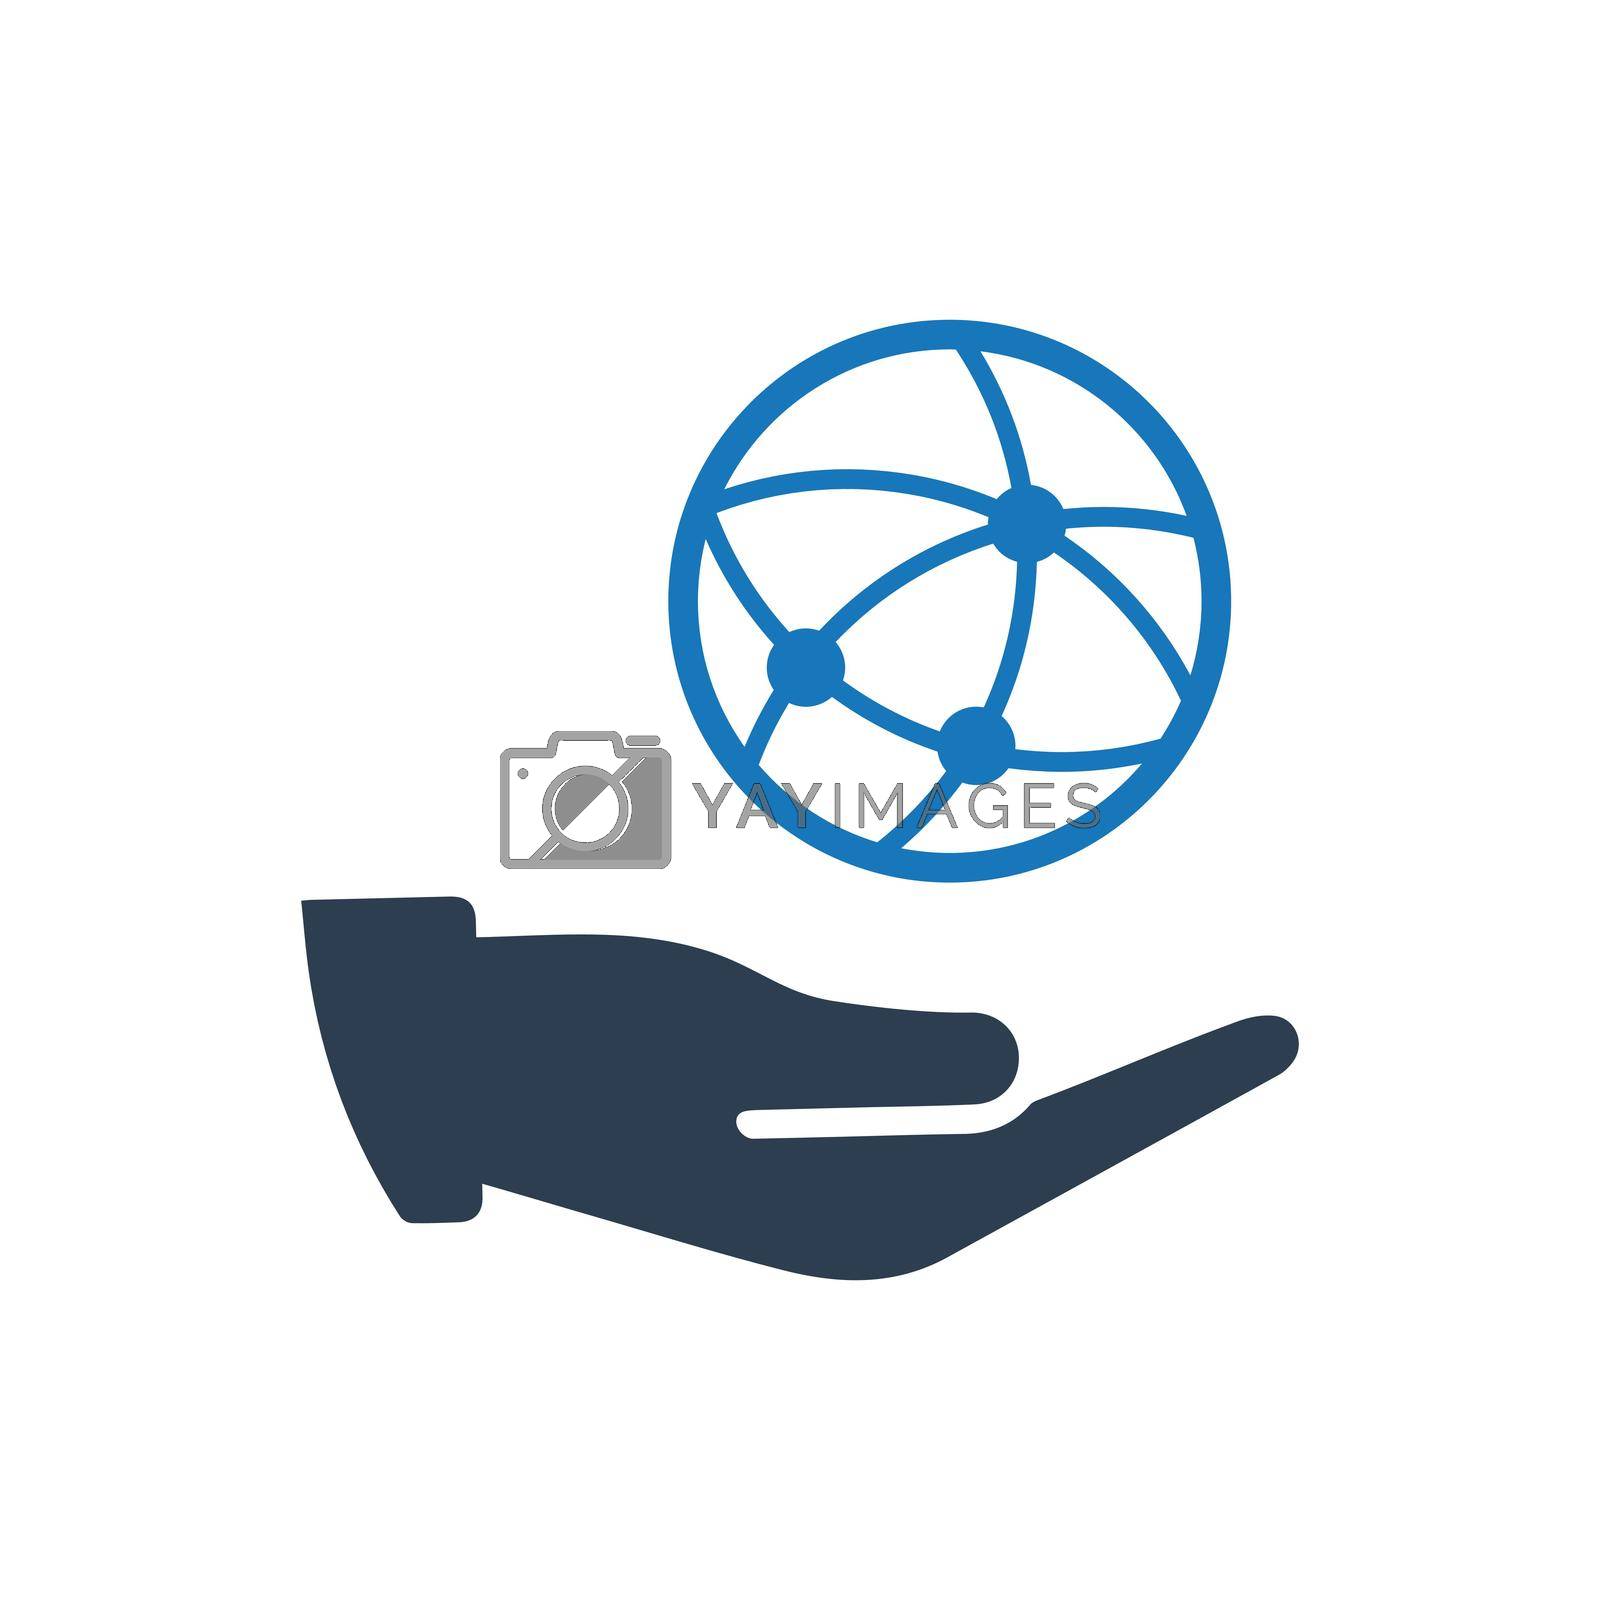 Global Business Communication icon. Vector EPS file.